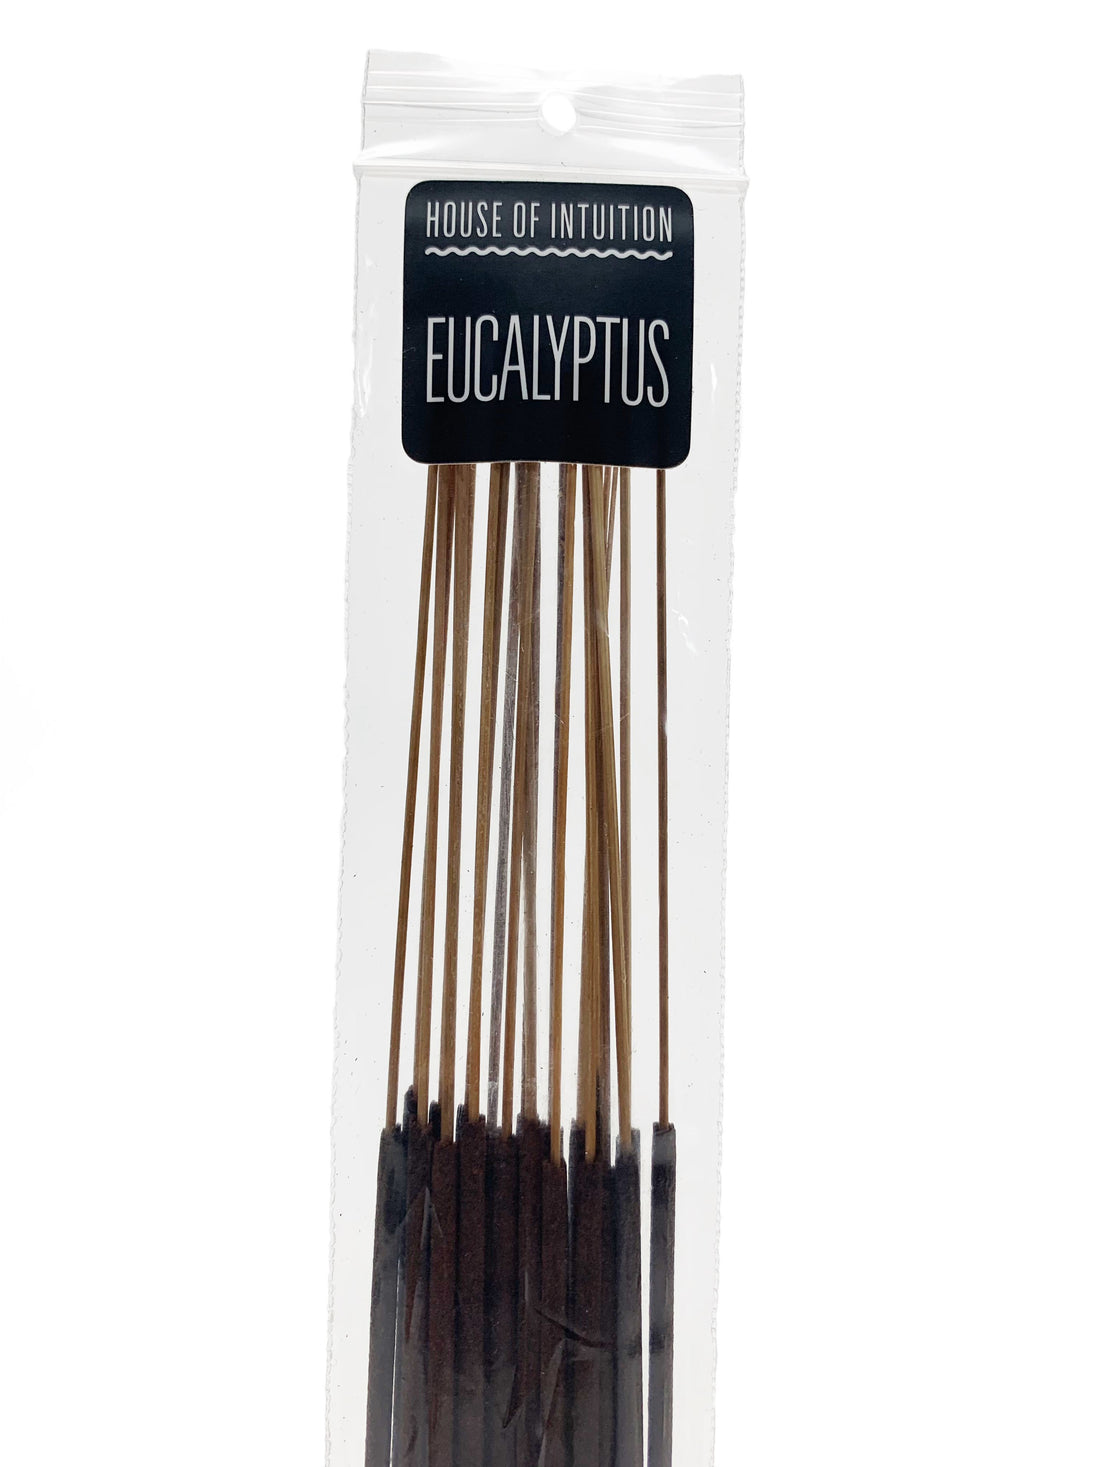 Eucalyptus Incense HOI Incense Sticks House of Intuition 